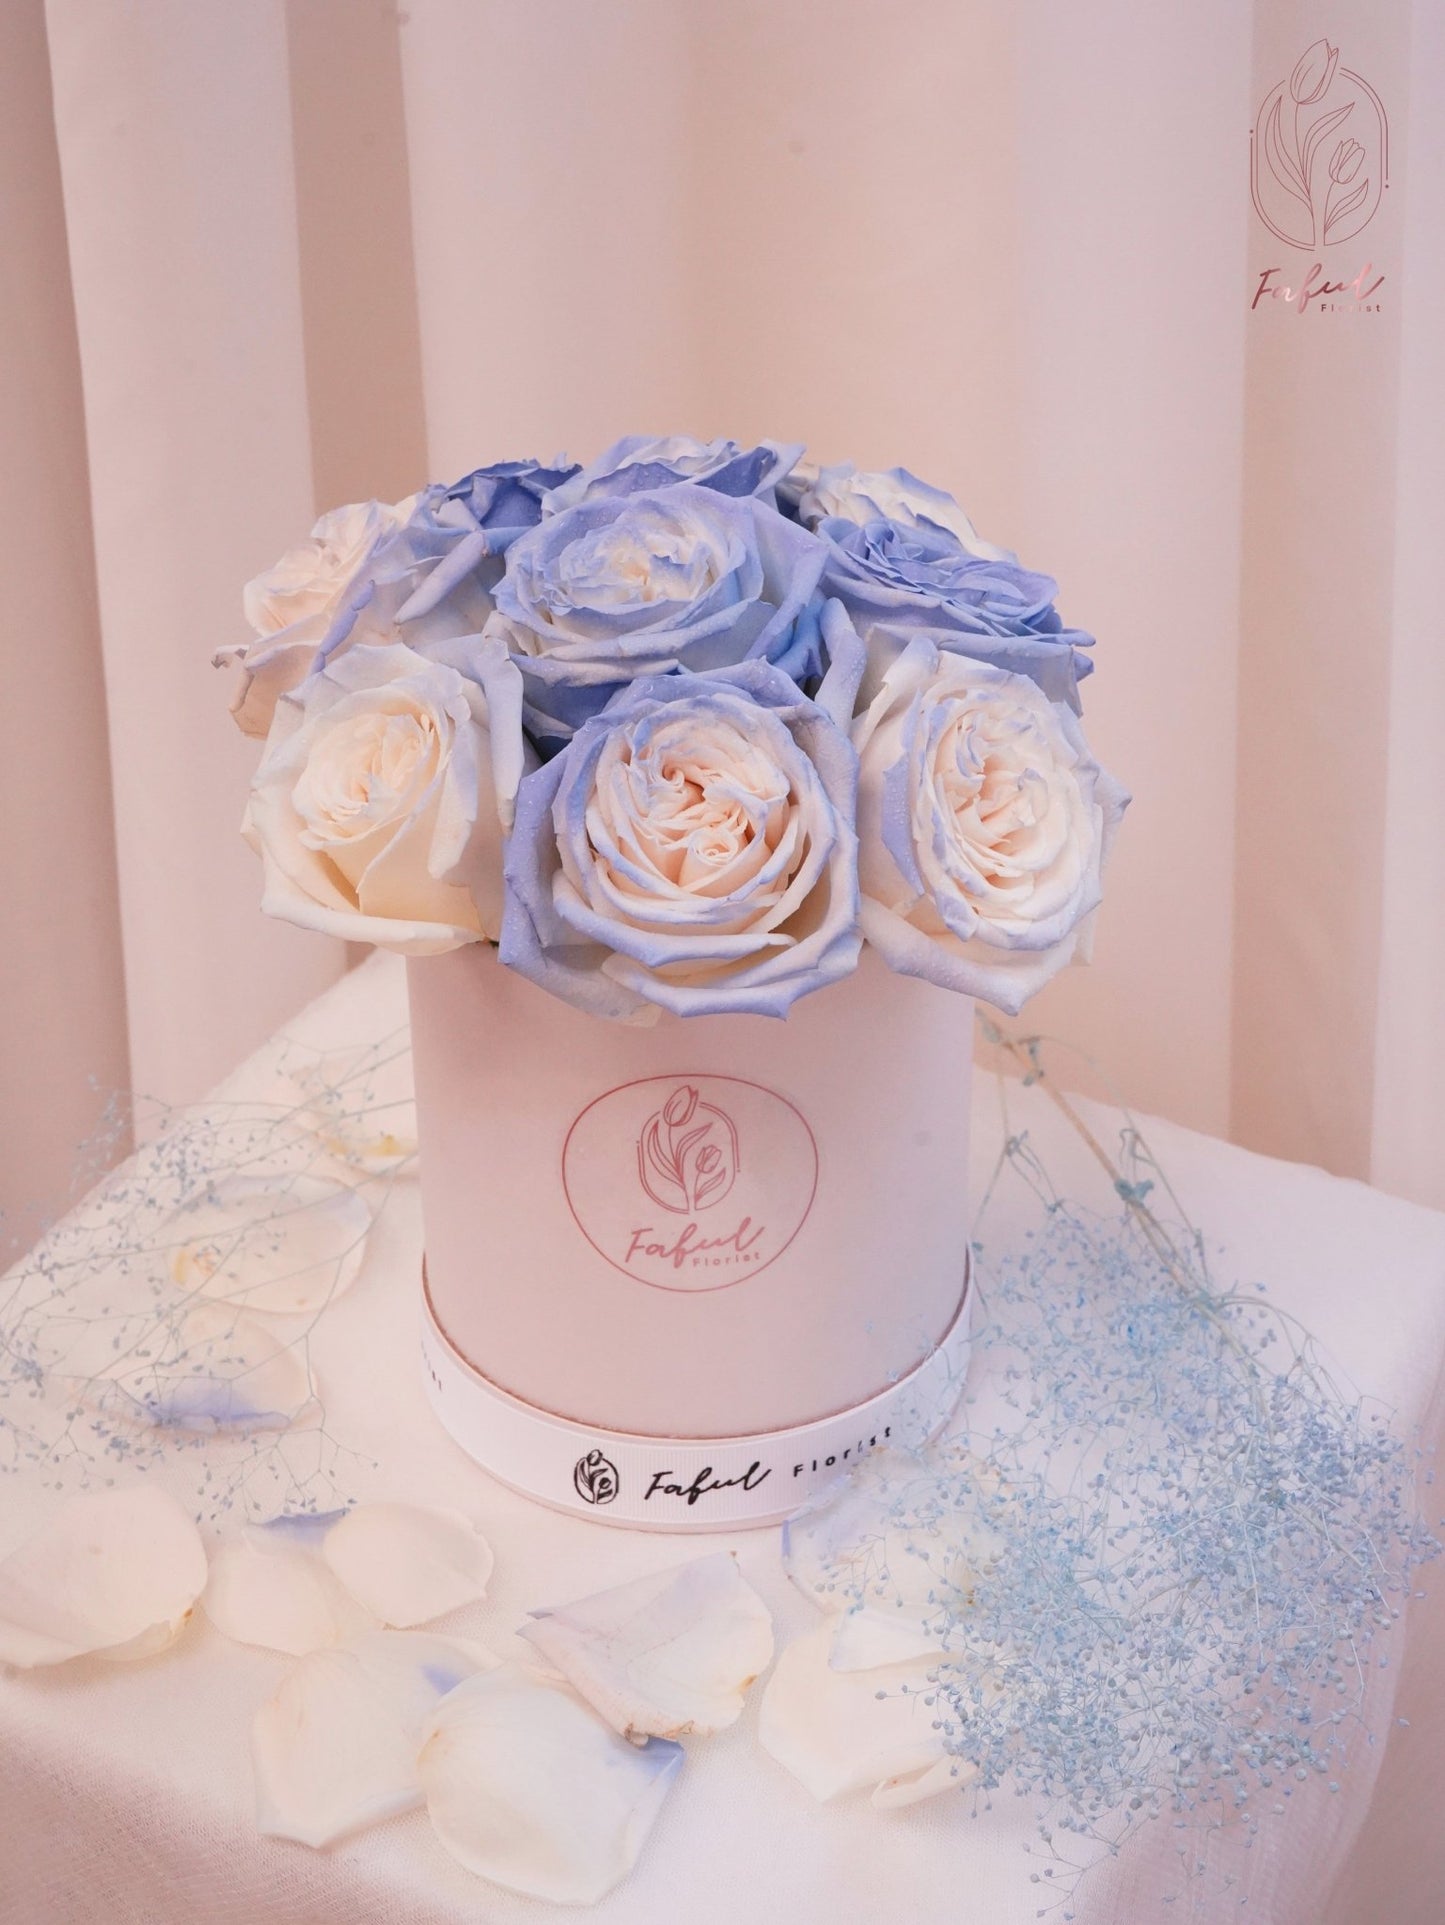  "Frozen Blue Rose Flowers" - A mesmerizing flower box featuring stunning blue roses, perfect flowers for flower delivery in Hong Kong.3